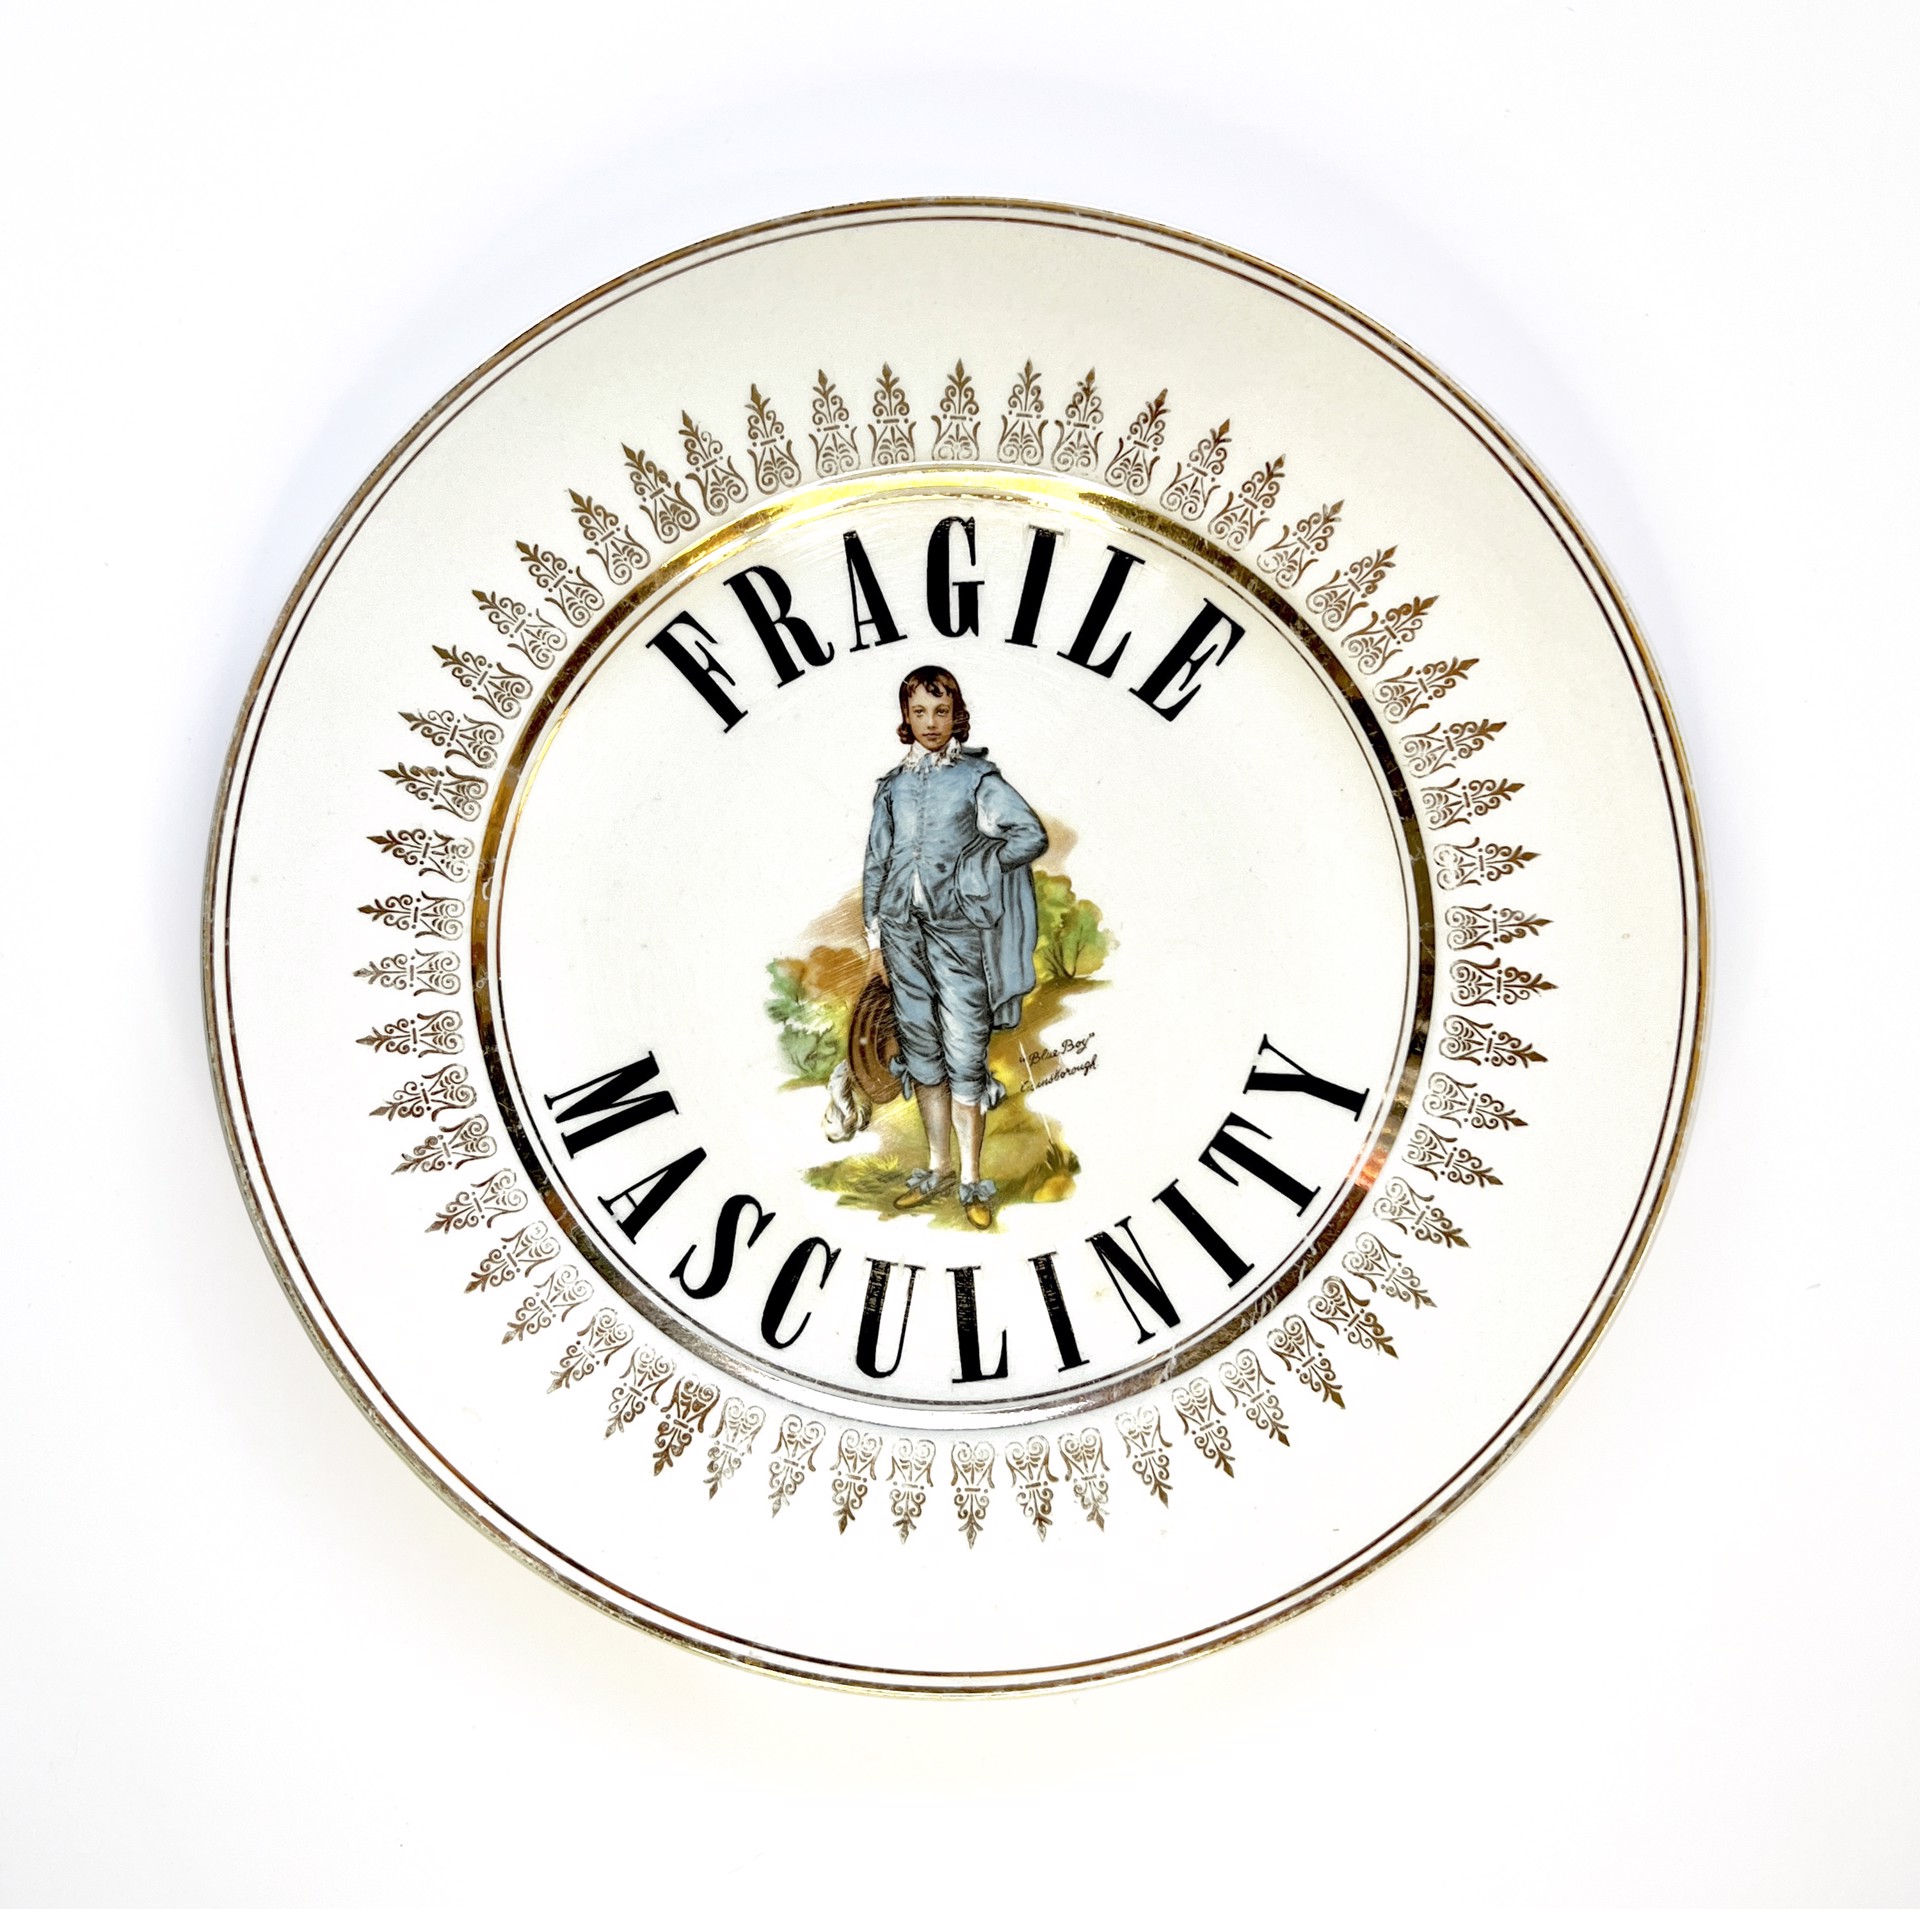 Fragile masculinity (dinner plate) by Marie-Claude Marquis